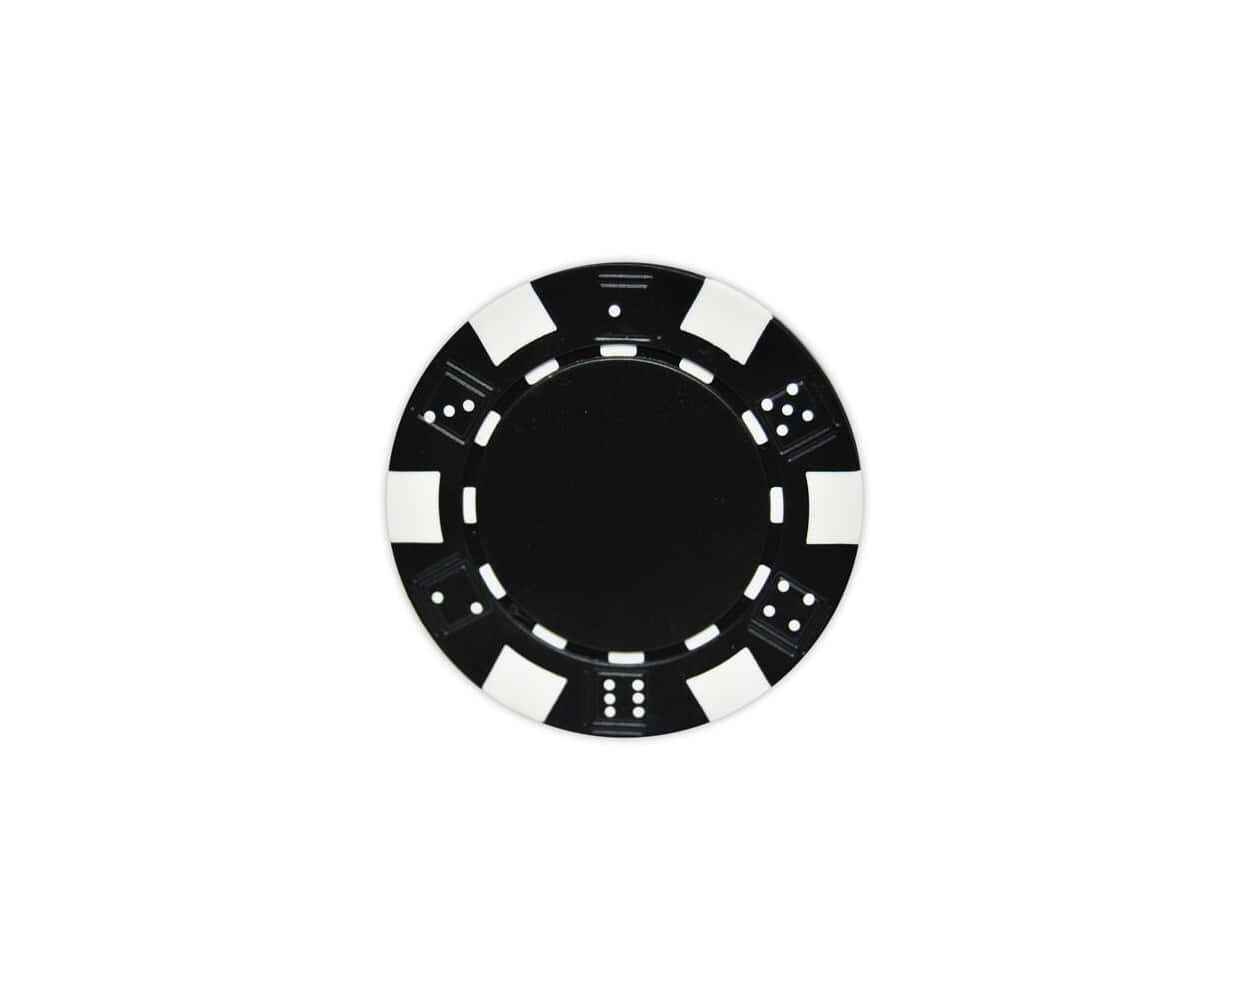 A Black And White Poker Chip On A White Background